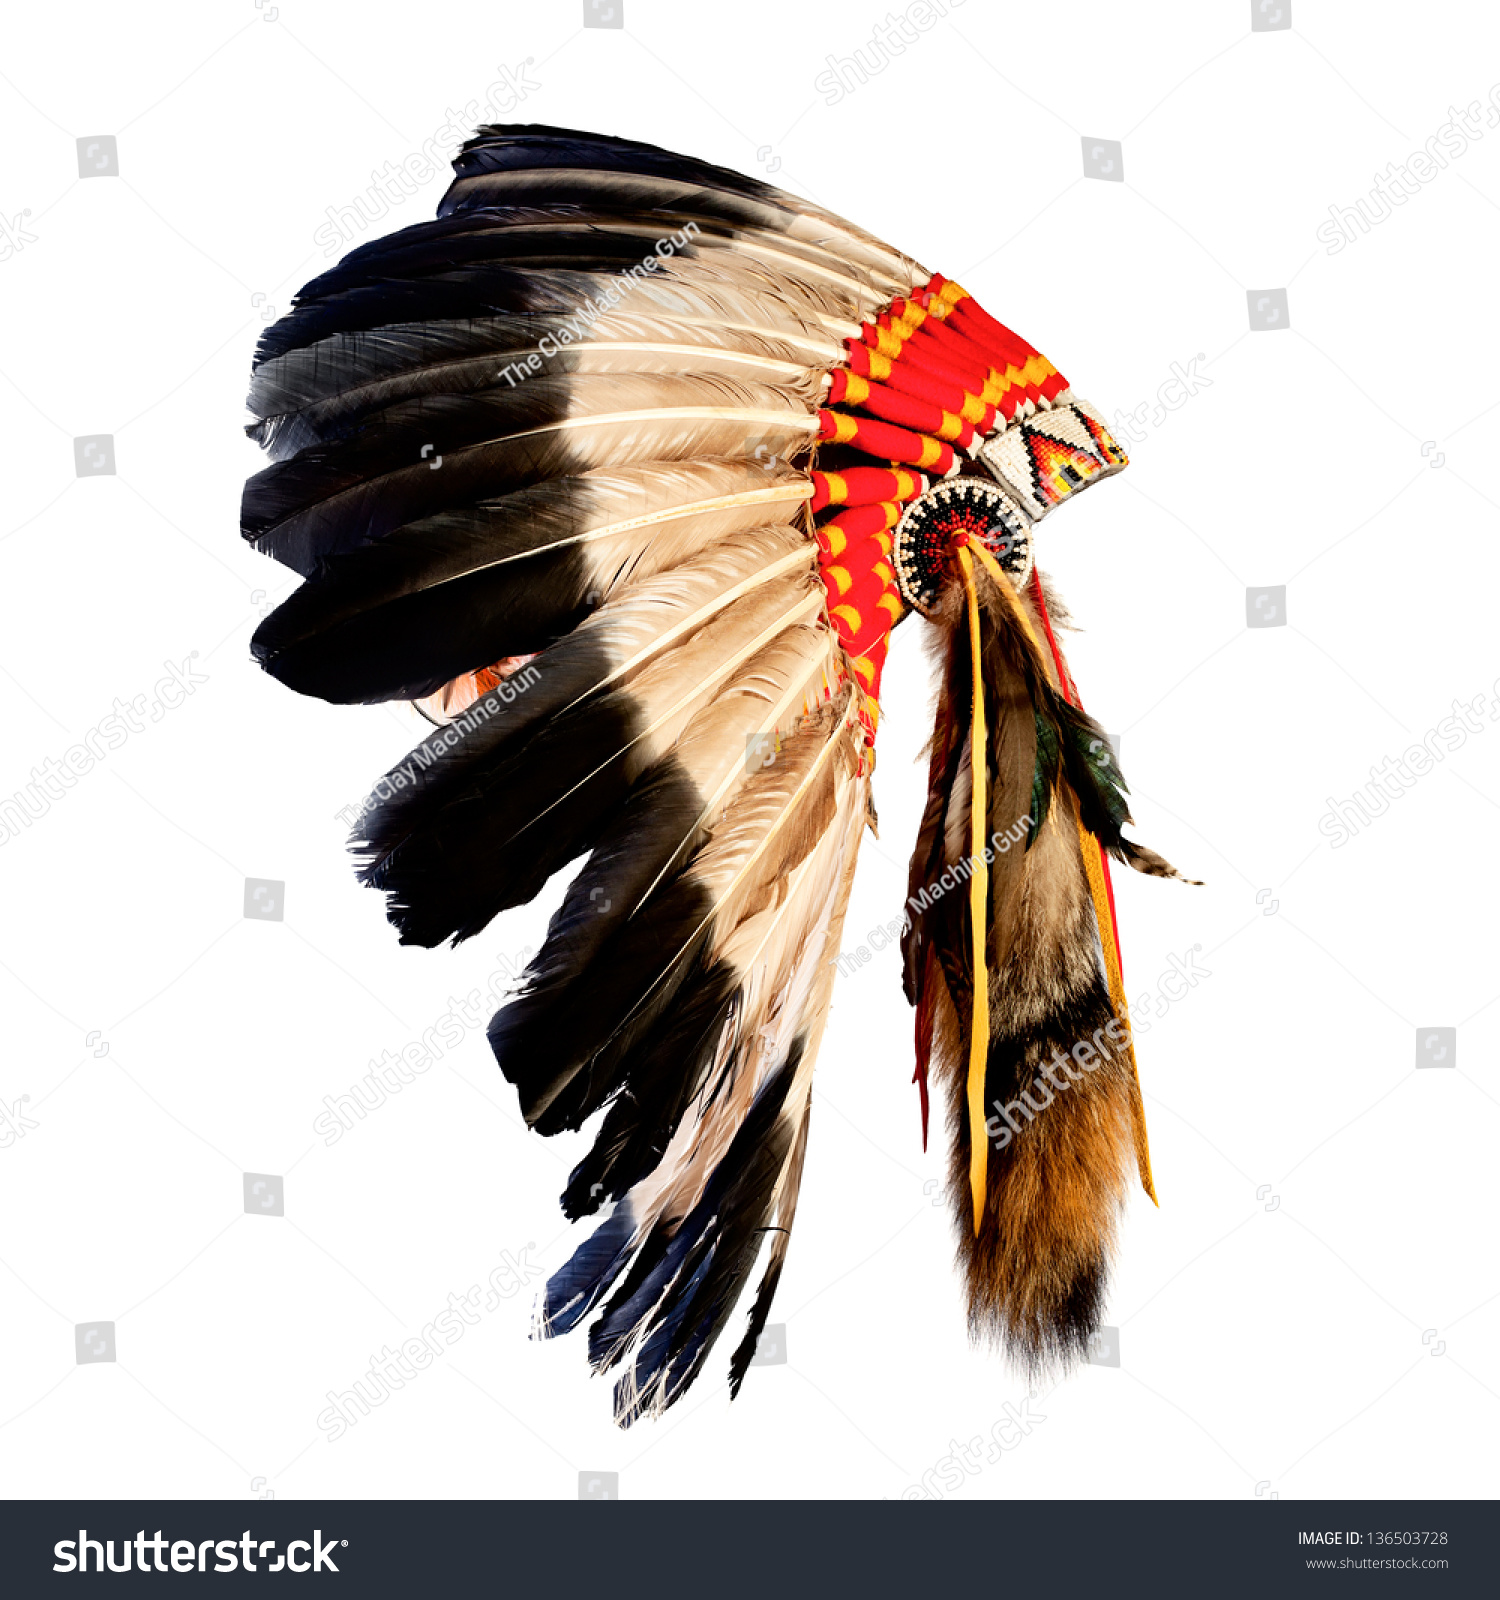 native american indian chief headdress (indian chief mascot, indian tribal headdress, indian headdress) #136503728